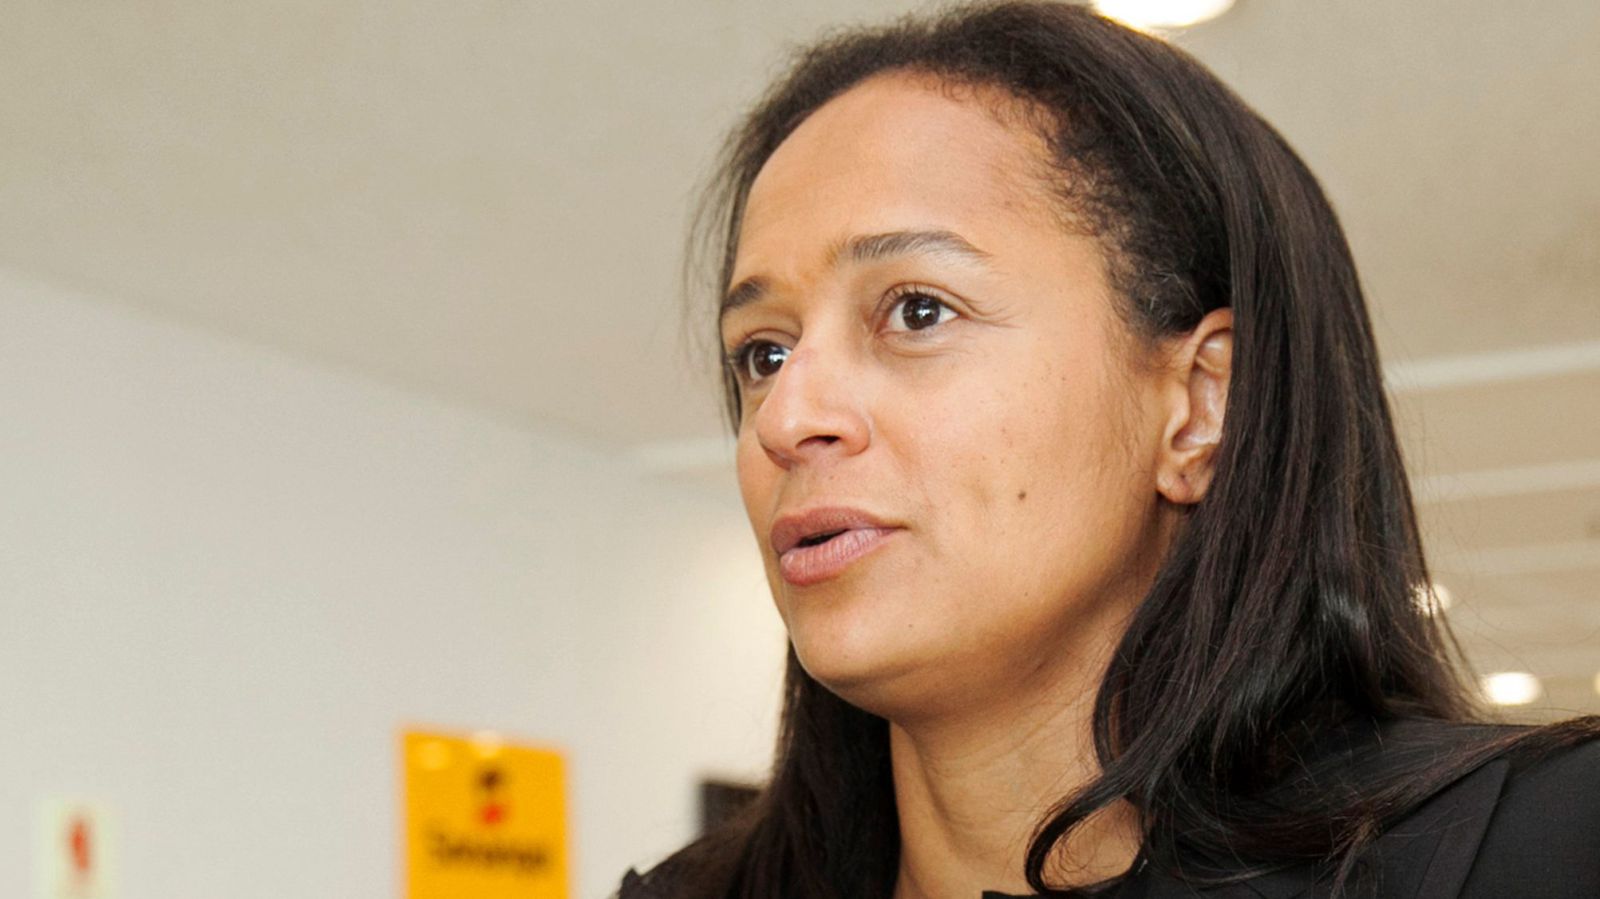 Africa’s richest woman has been fired from Angola’s state oil firm by the new president